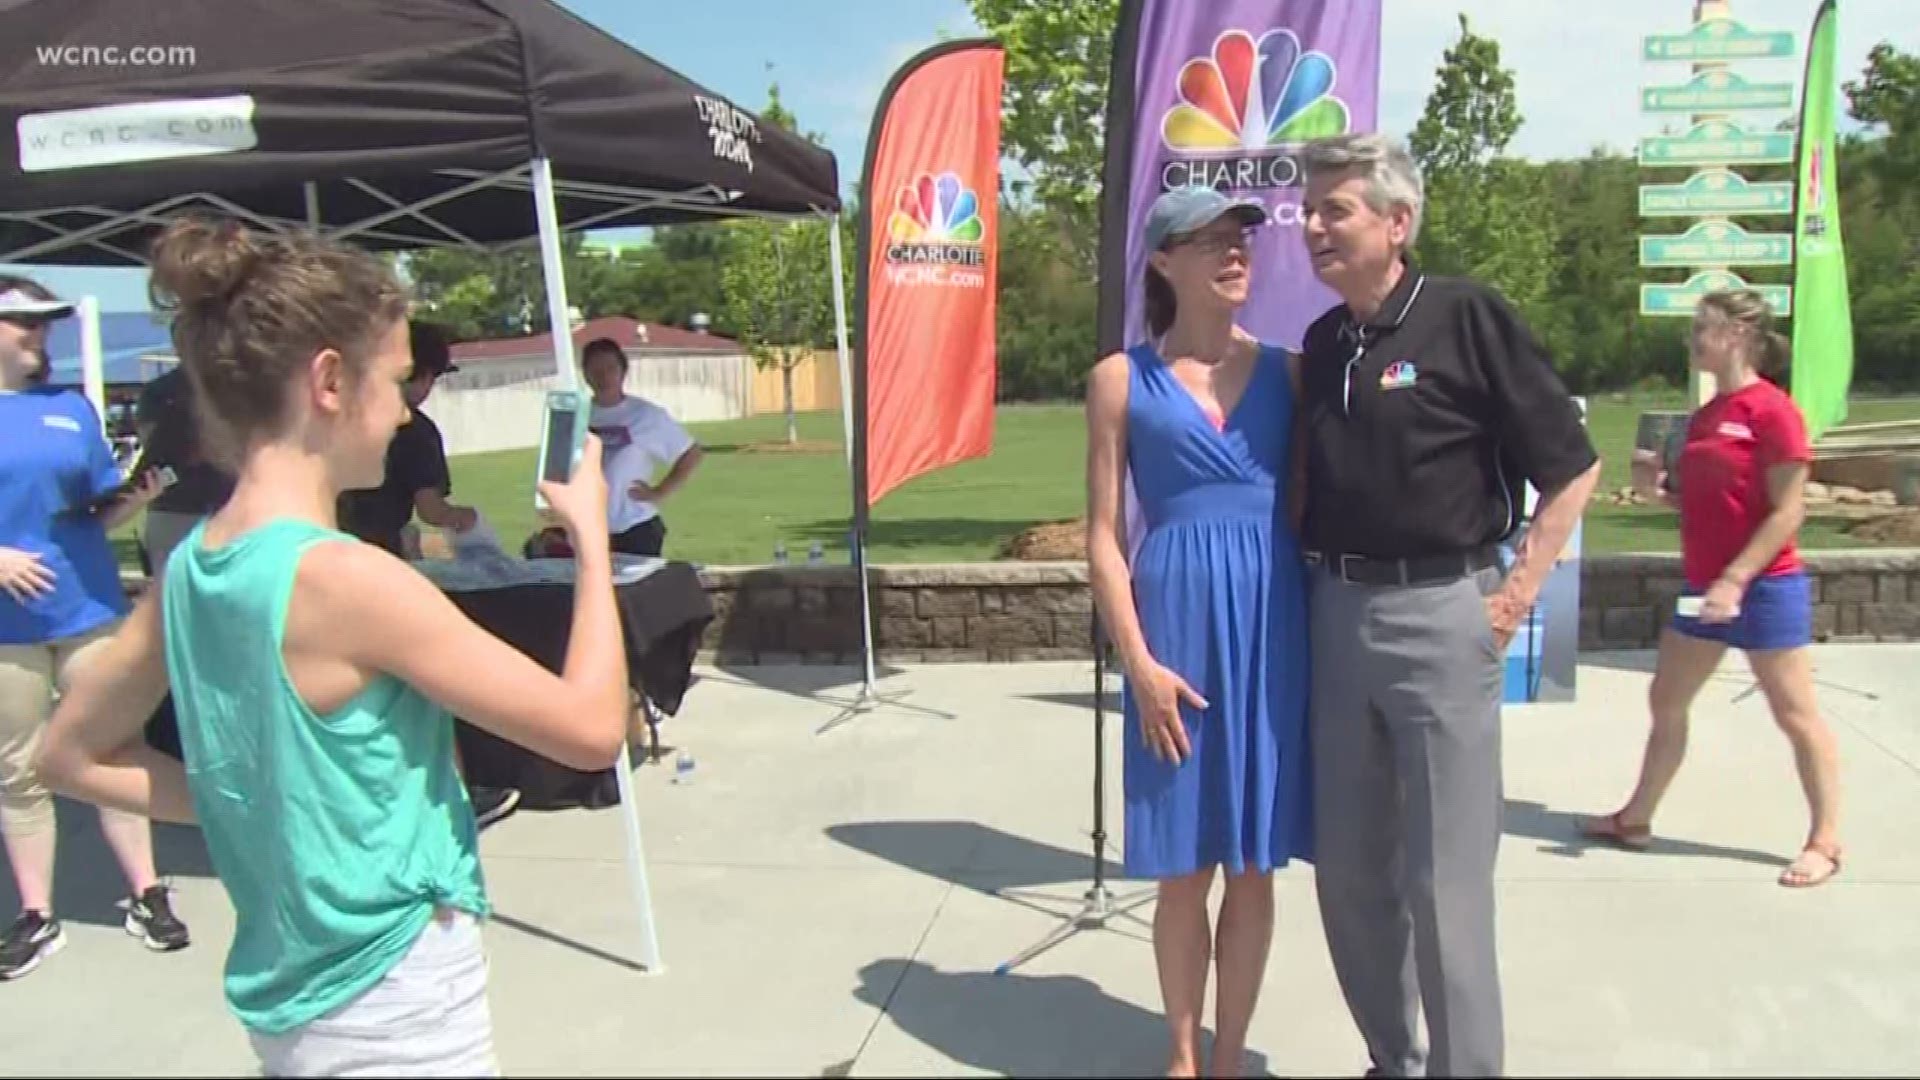 NBC Charlotte's morning crew visited Carowinds' Carolina Harbor water park Saturday afternoon to help open up the park's summer season.